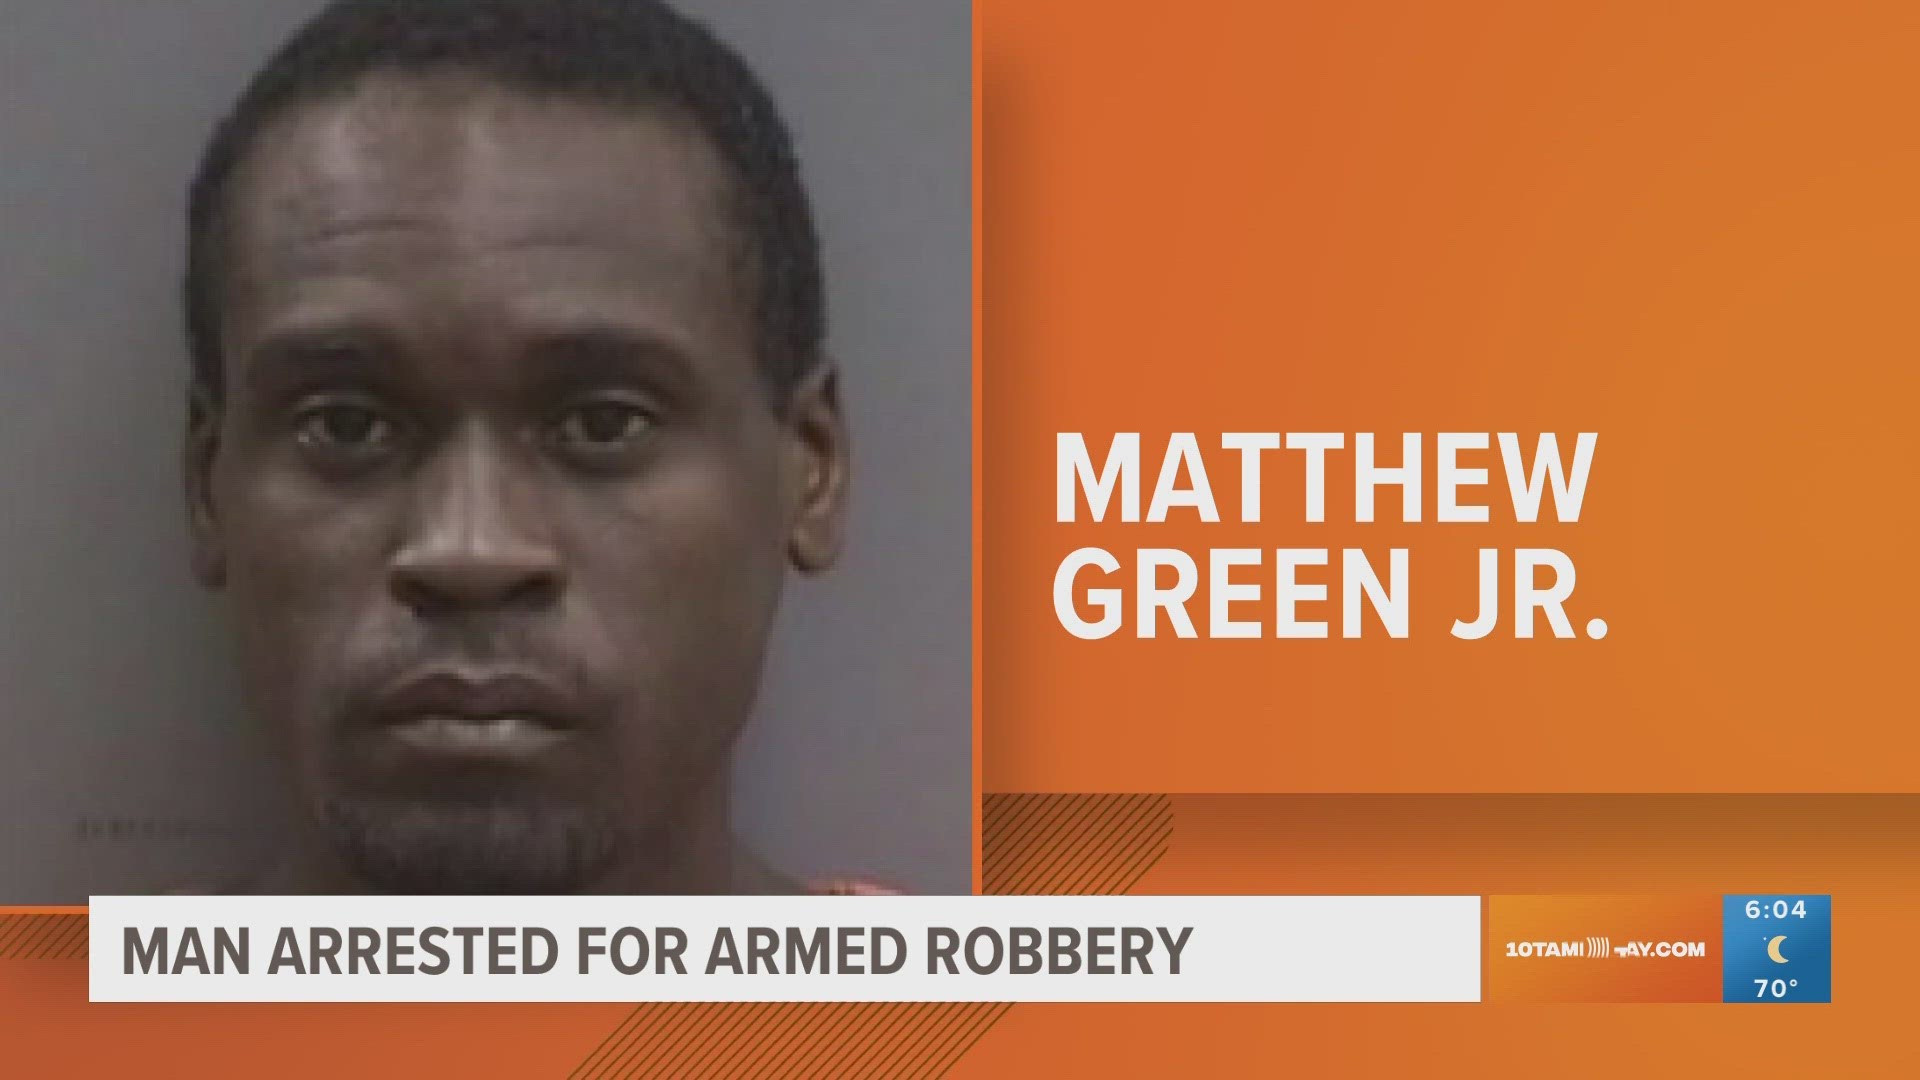 A man was arrested for an armed robbery that happened earlier this week. He is accused of assaulting a jogger and stealing their phone before running off.